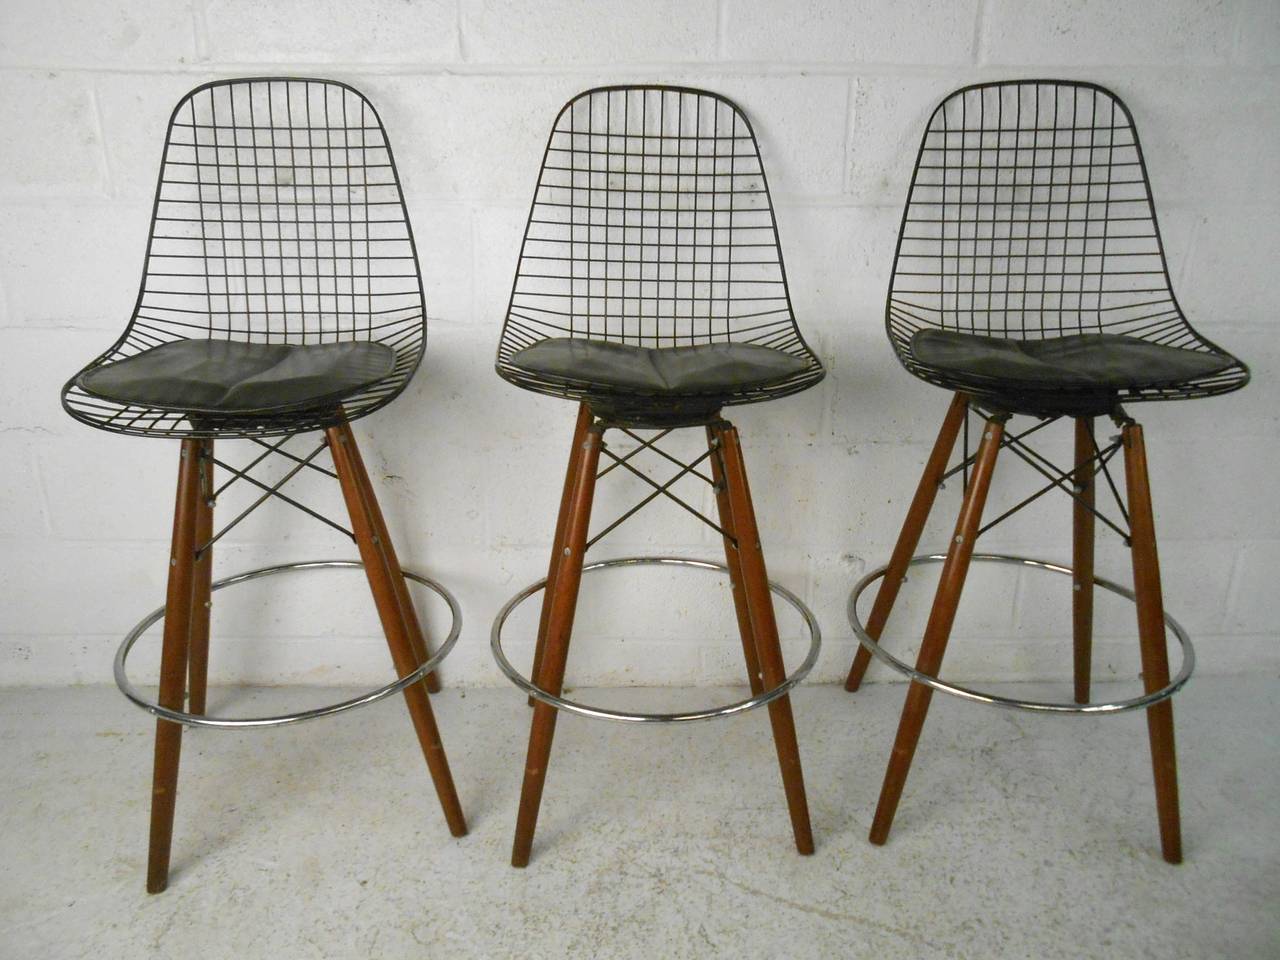 This set of vintage barstools meshes swiveling metal seat frames with tapered wooden legs to create a striking addition to any bar setting. Stretchers and chrome footrest offer added stability to the seats, while leather padding provides added